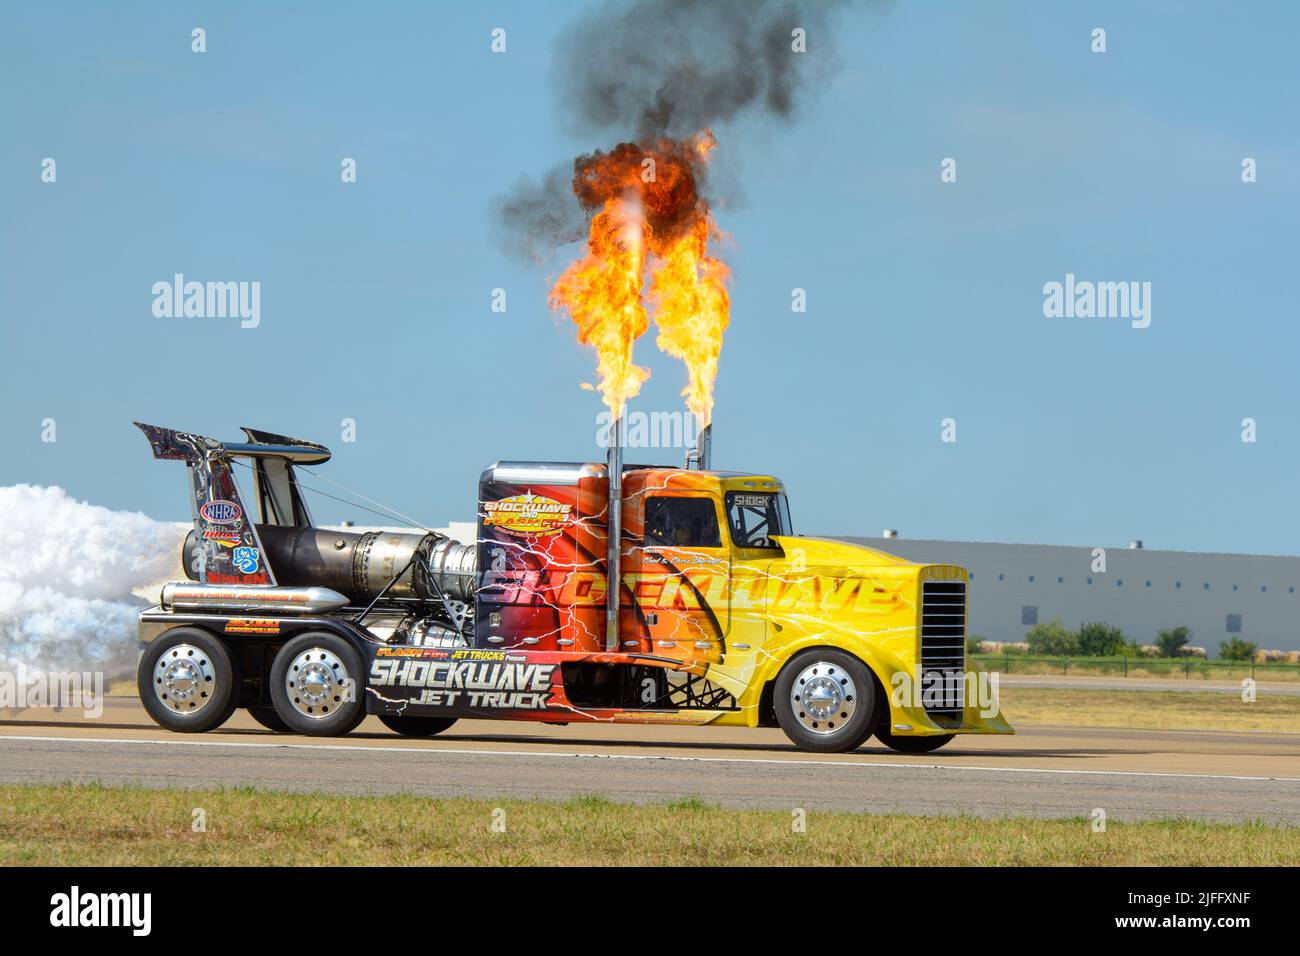 Chris Darnell & Shockwave performing at 2015 Alliance Airshow, Fort Worth, Texas Stock Photo